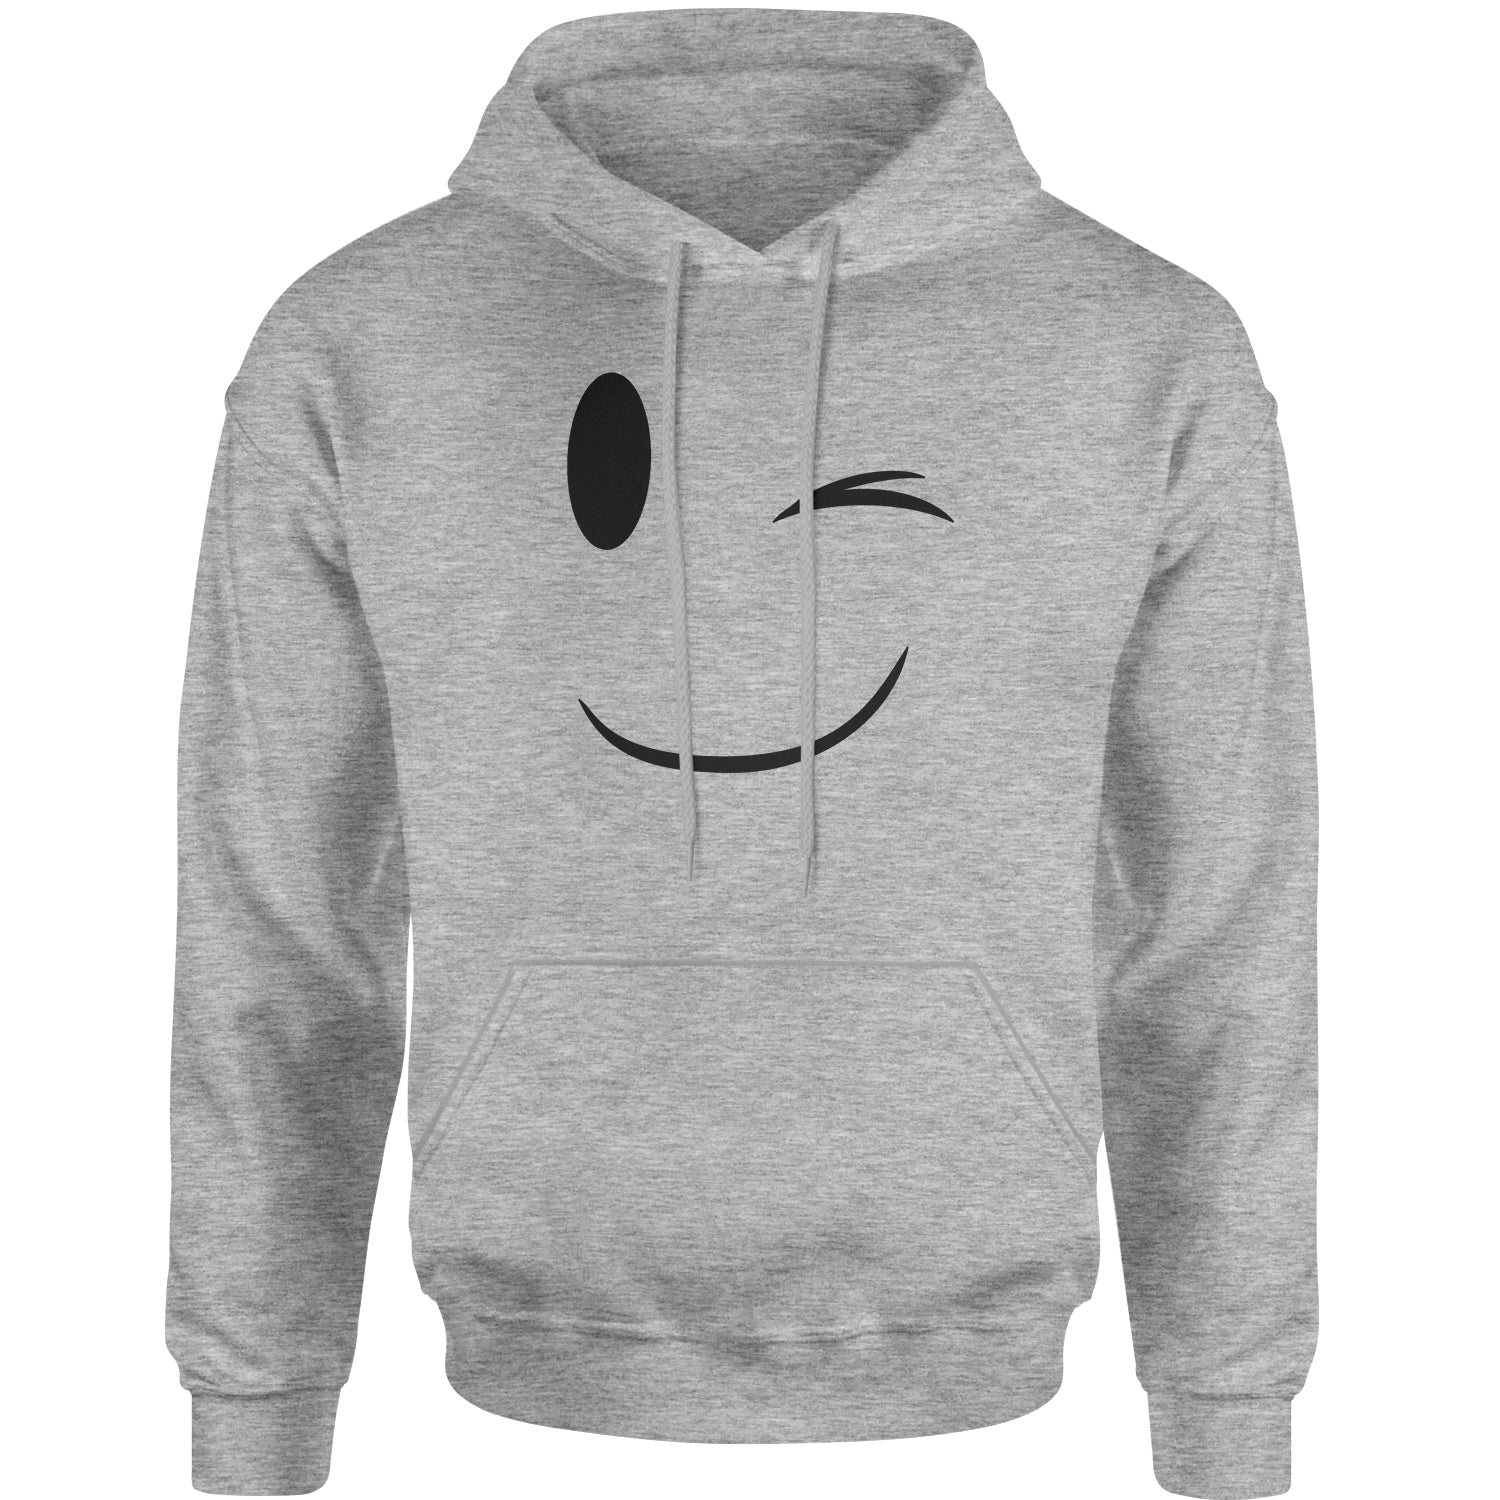 Emoticon Winking Smile Face Adult Hoodie Sweatshirt cosplay, costume, dress, emoji, emote, face, halloween, smiley, up, yellow by Expression Tees